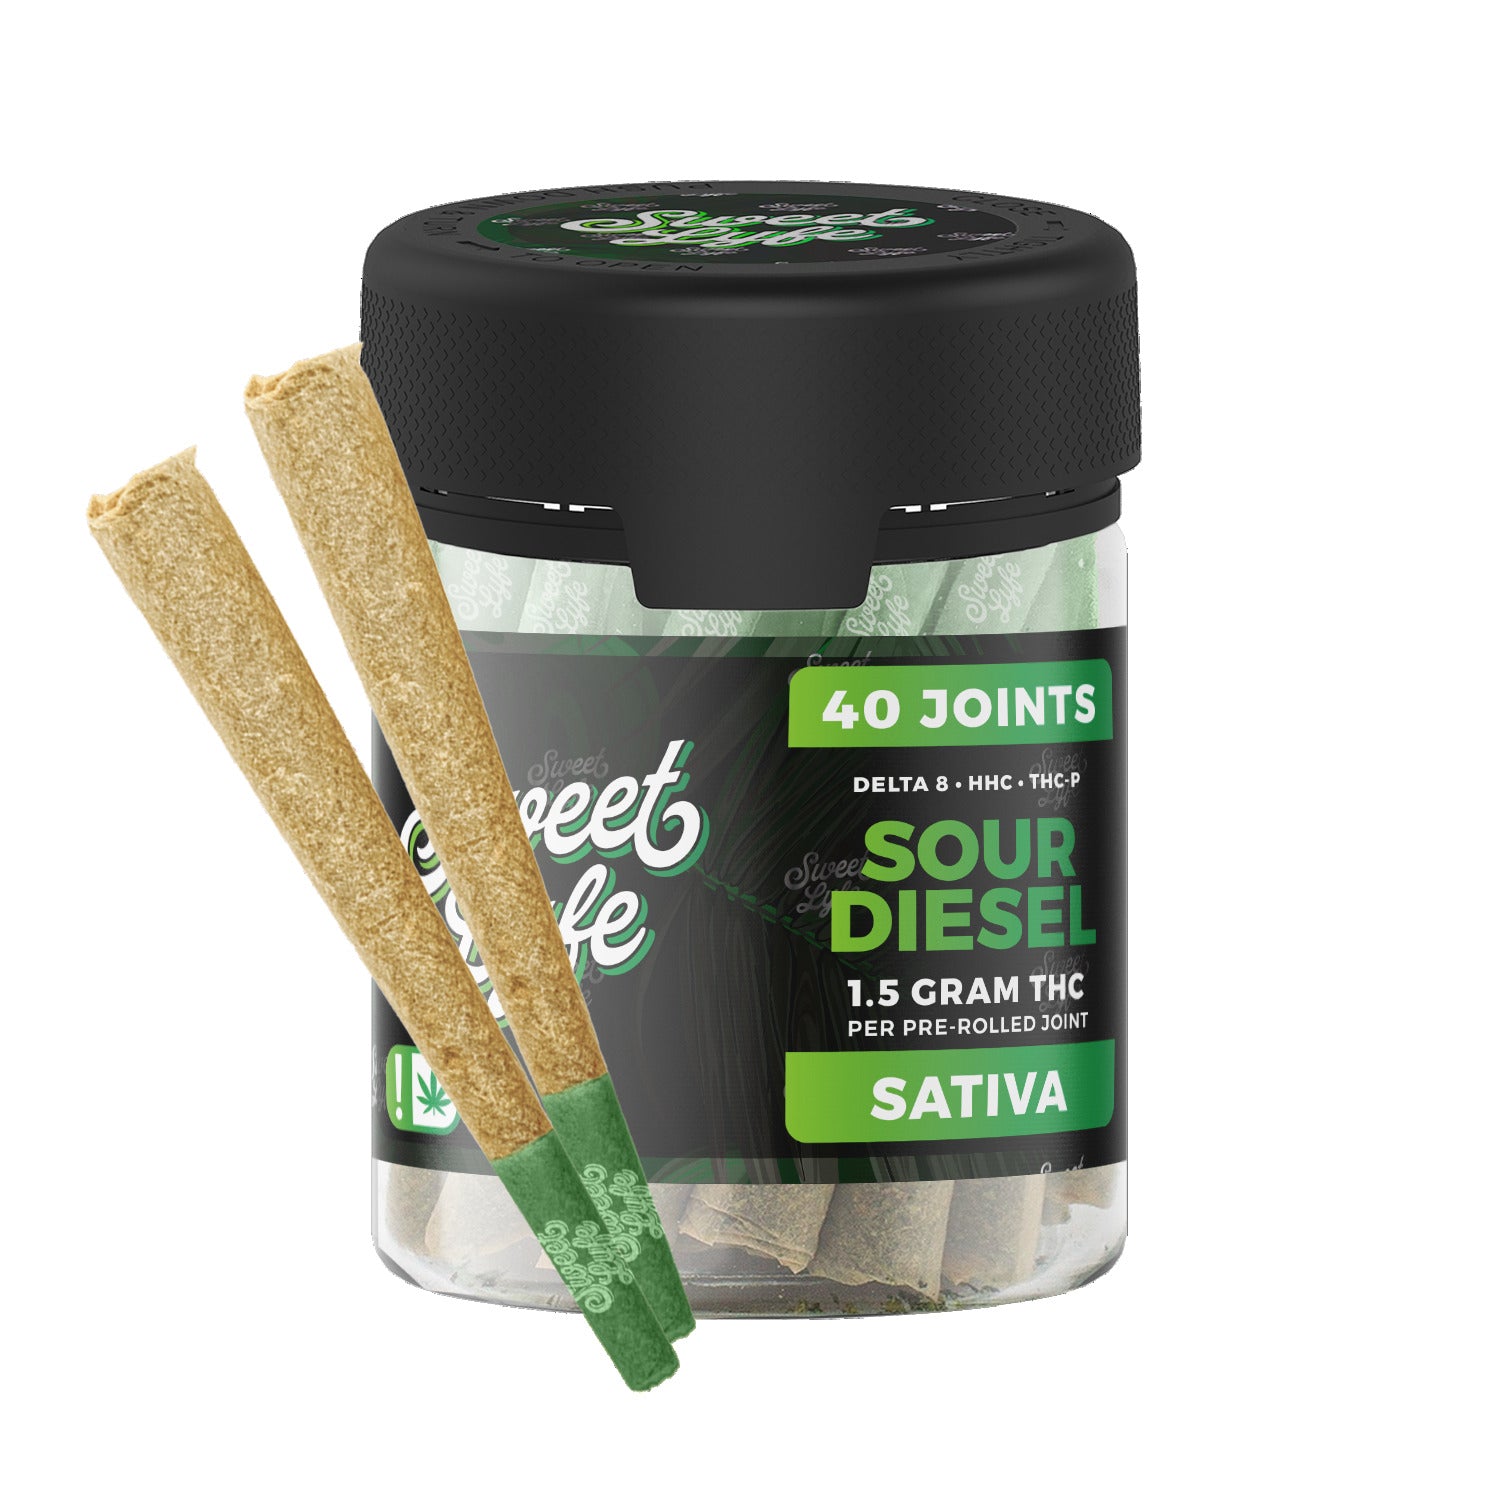 40 Pack of Joints D8+THCP  - 1.5g per Joint - Sour Diesel - Sativa